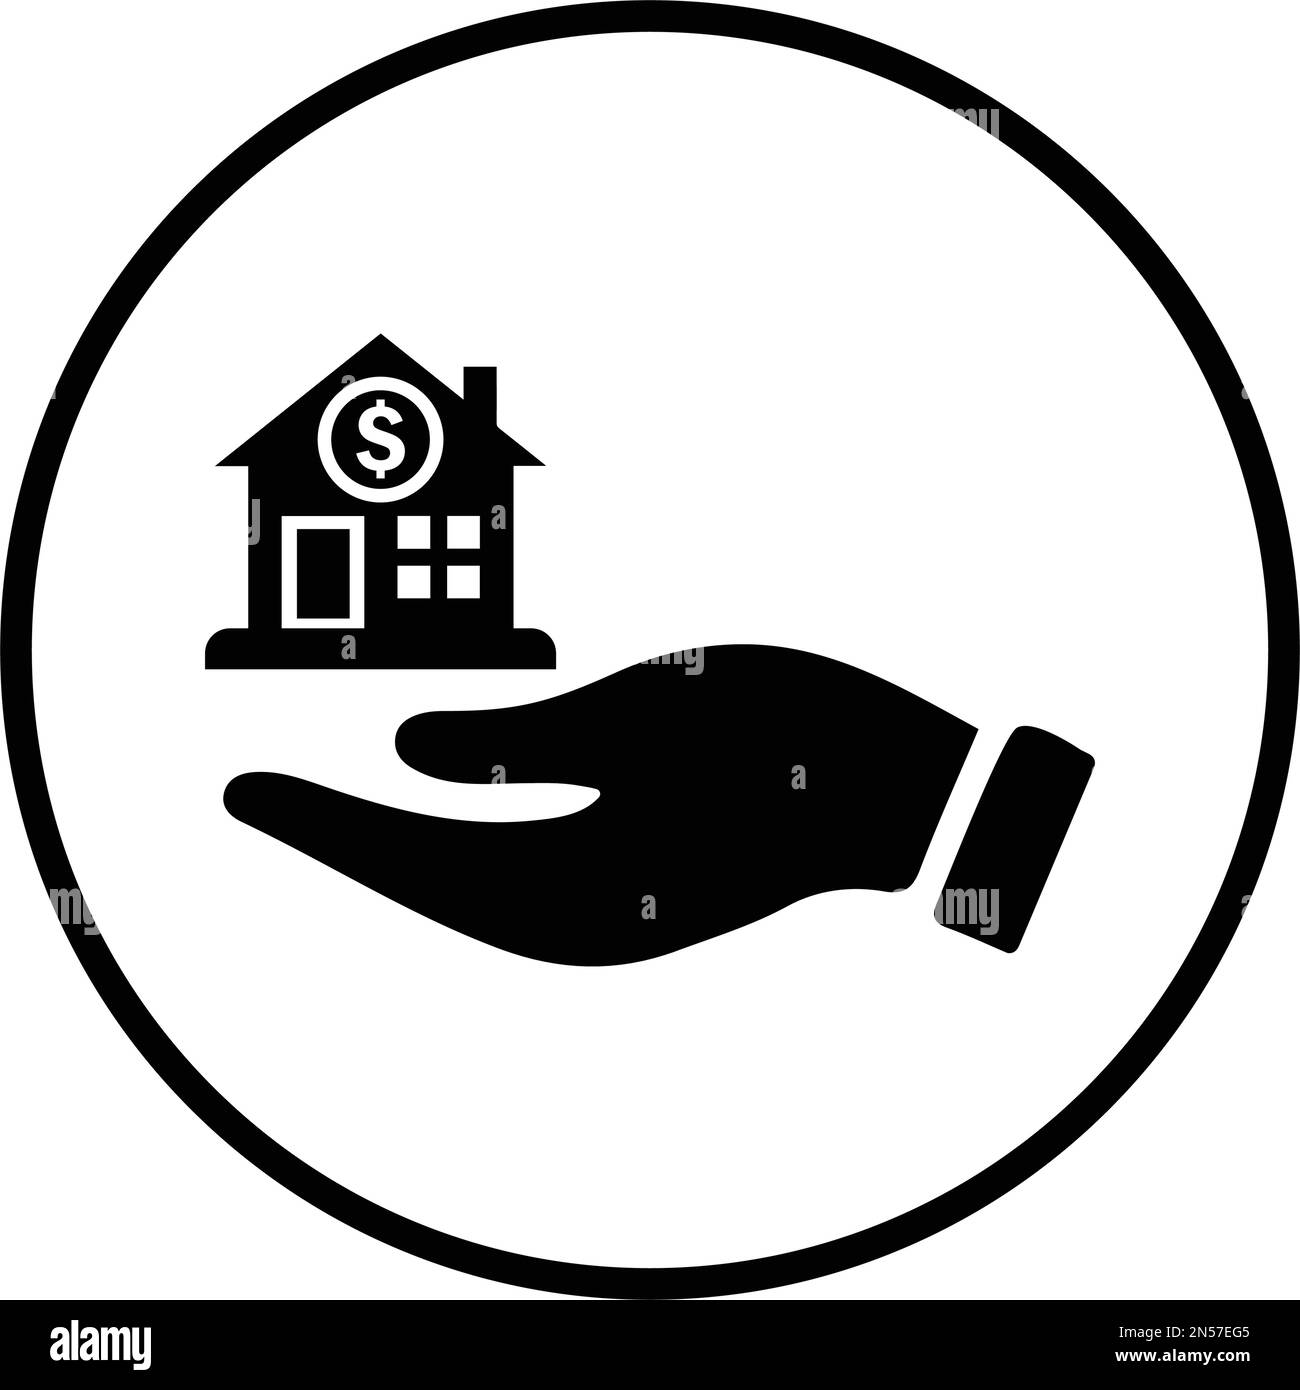 Refinance, mortgage, debt icon. Use for commercial purposes, print media, web or any type of design projects. Stock Vector